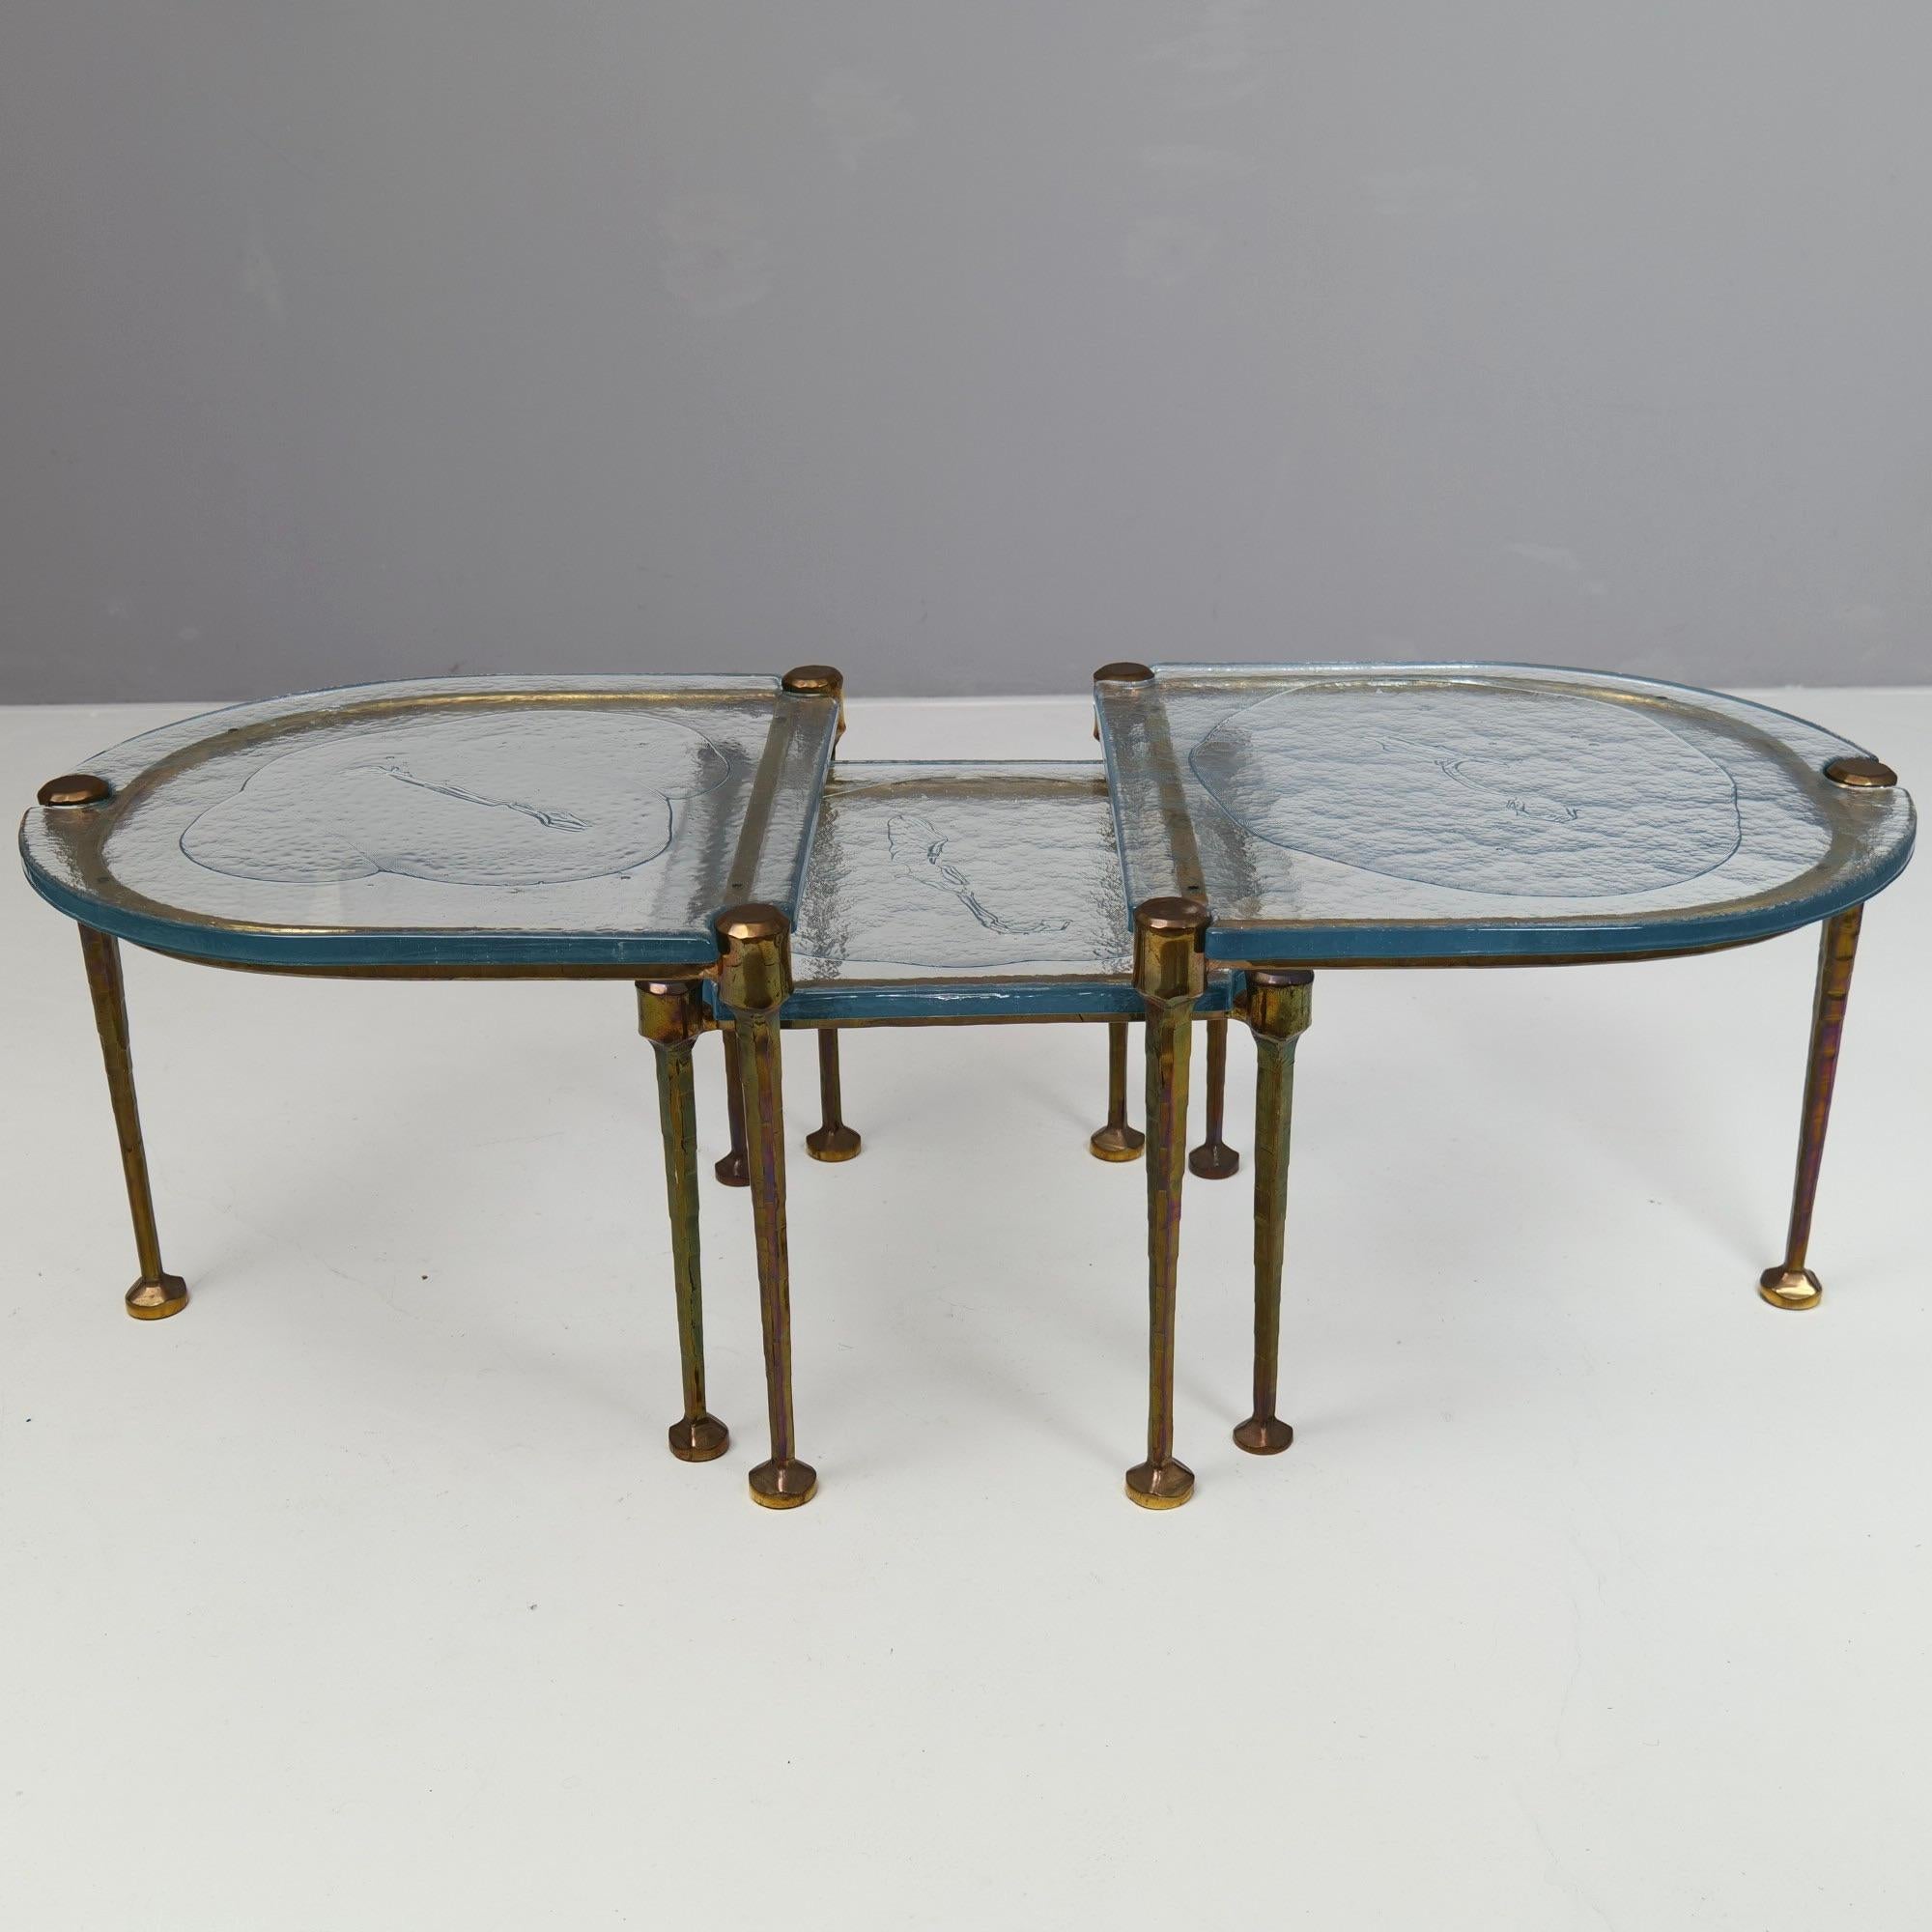 German forged bronze tables with blue cast glass - 1980s brutalist